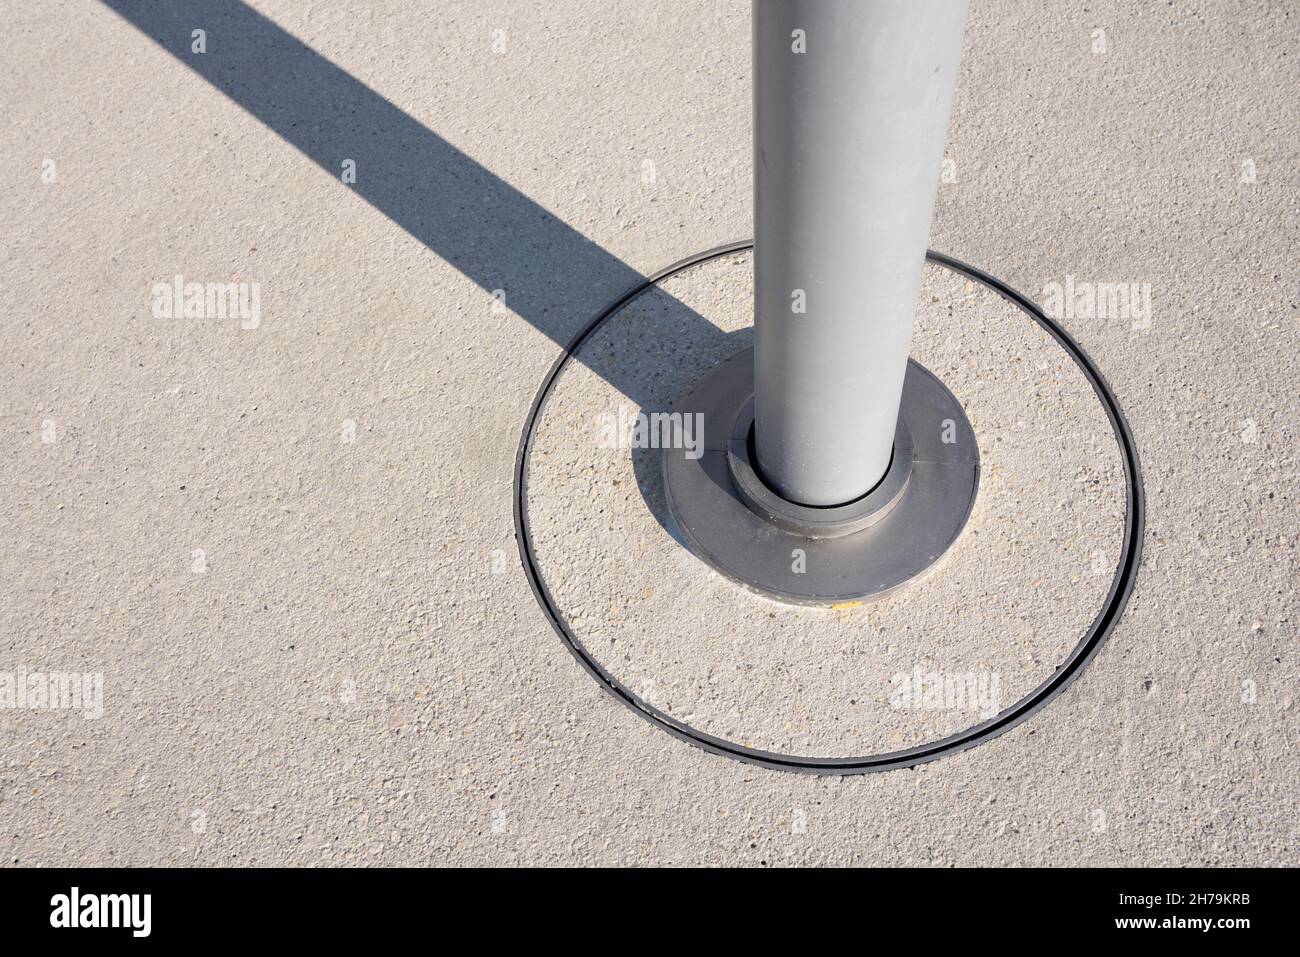 Modernist Lamp Post or Round Metal Pole Detail and Concrete & Steel Pavement Fixture Stock Photo